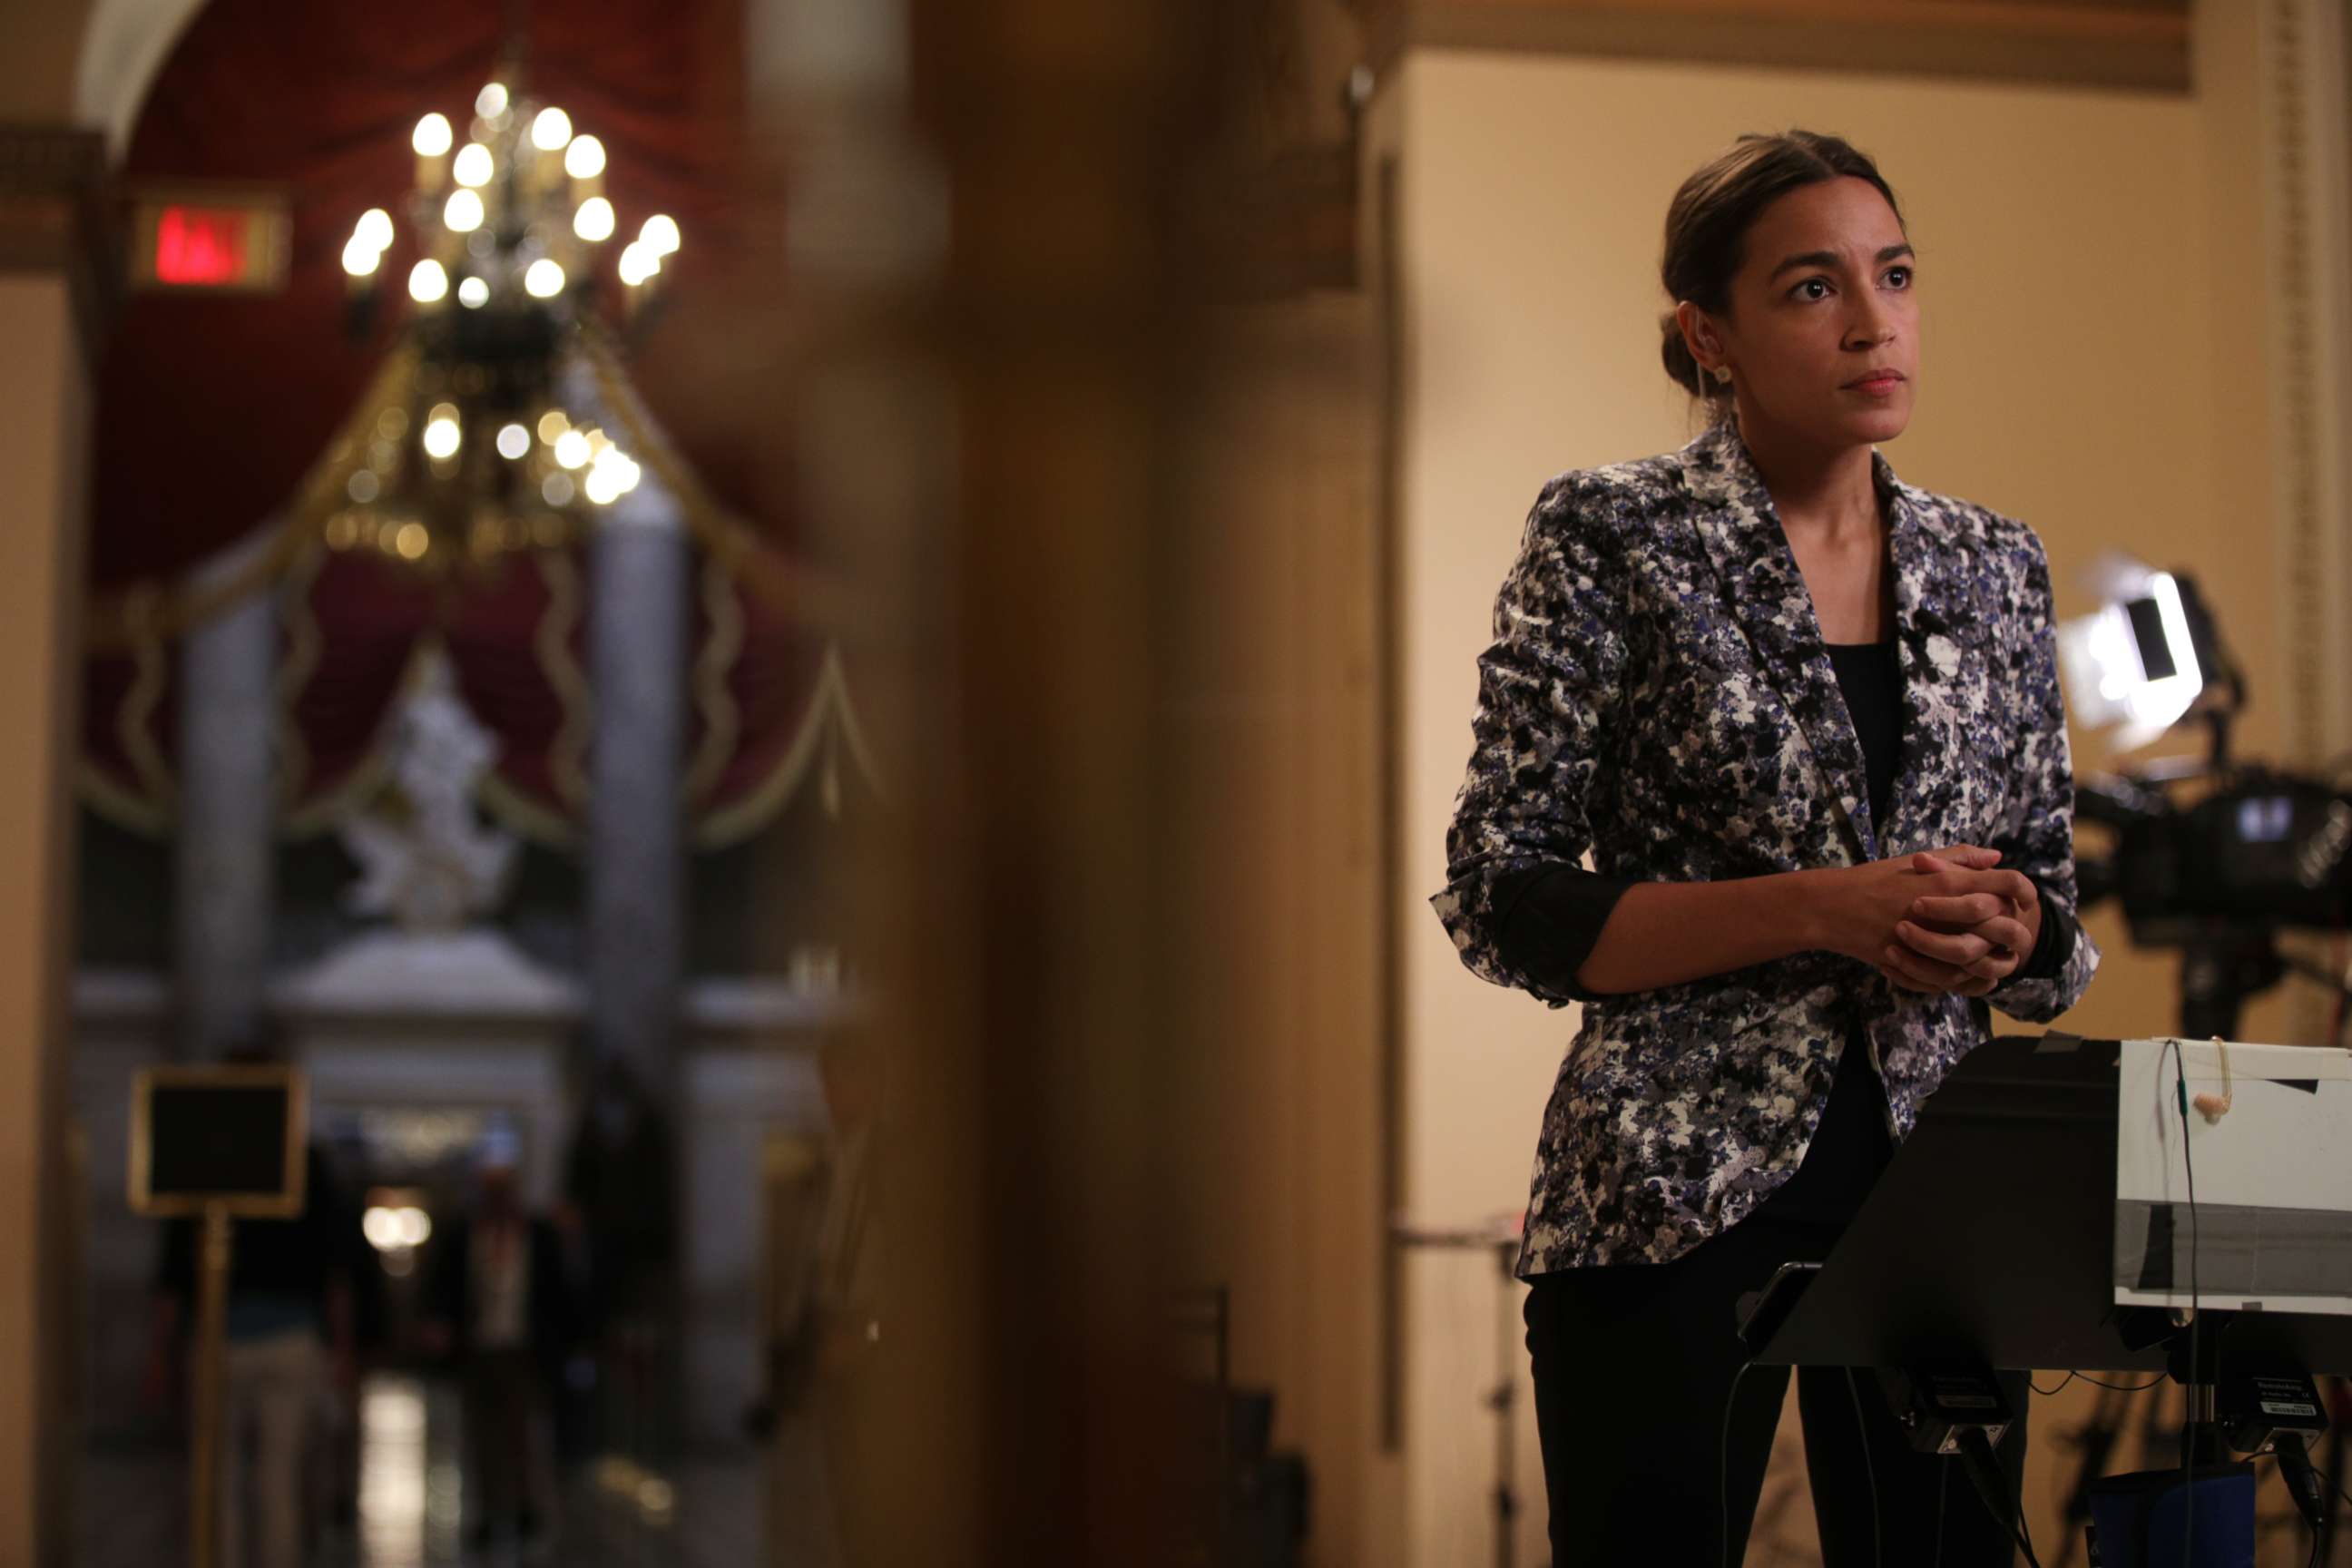 PHOTO: Rep. Alexandria Ocasio-Cortez is interviewed on June 27, 2019 at the U.S. Capitol in Washington.